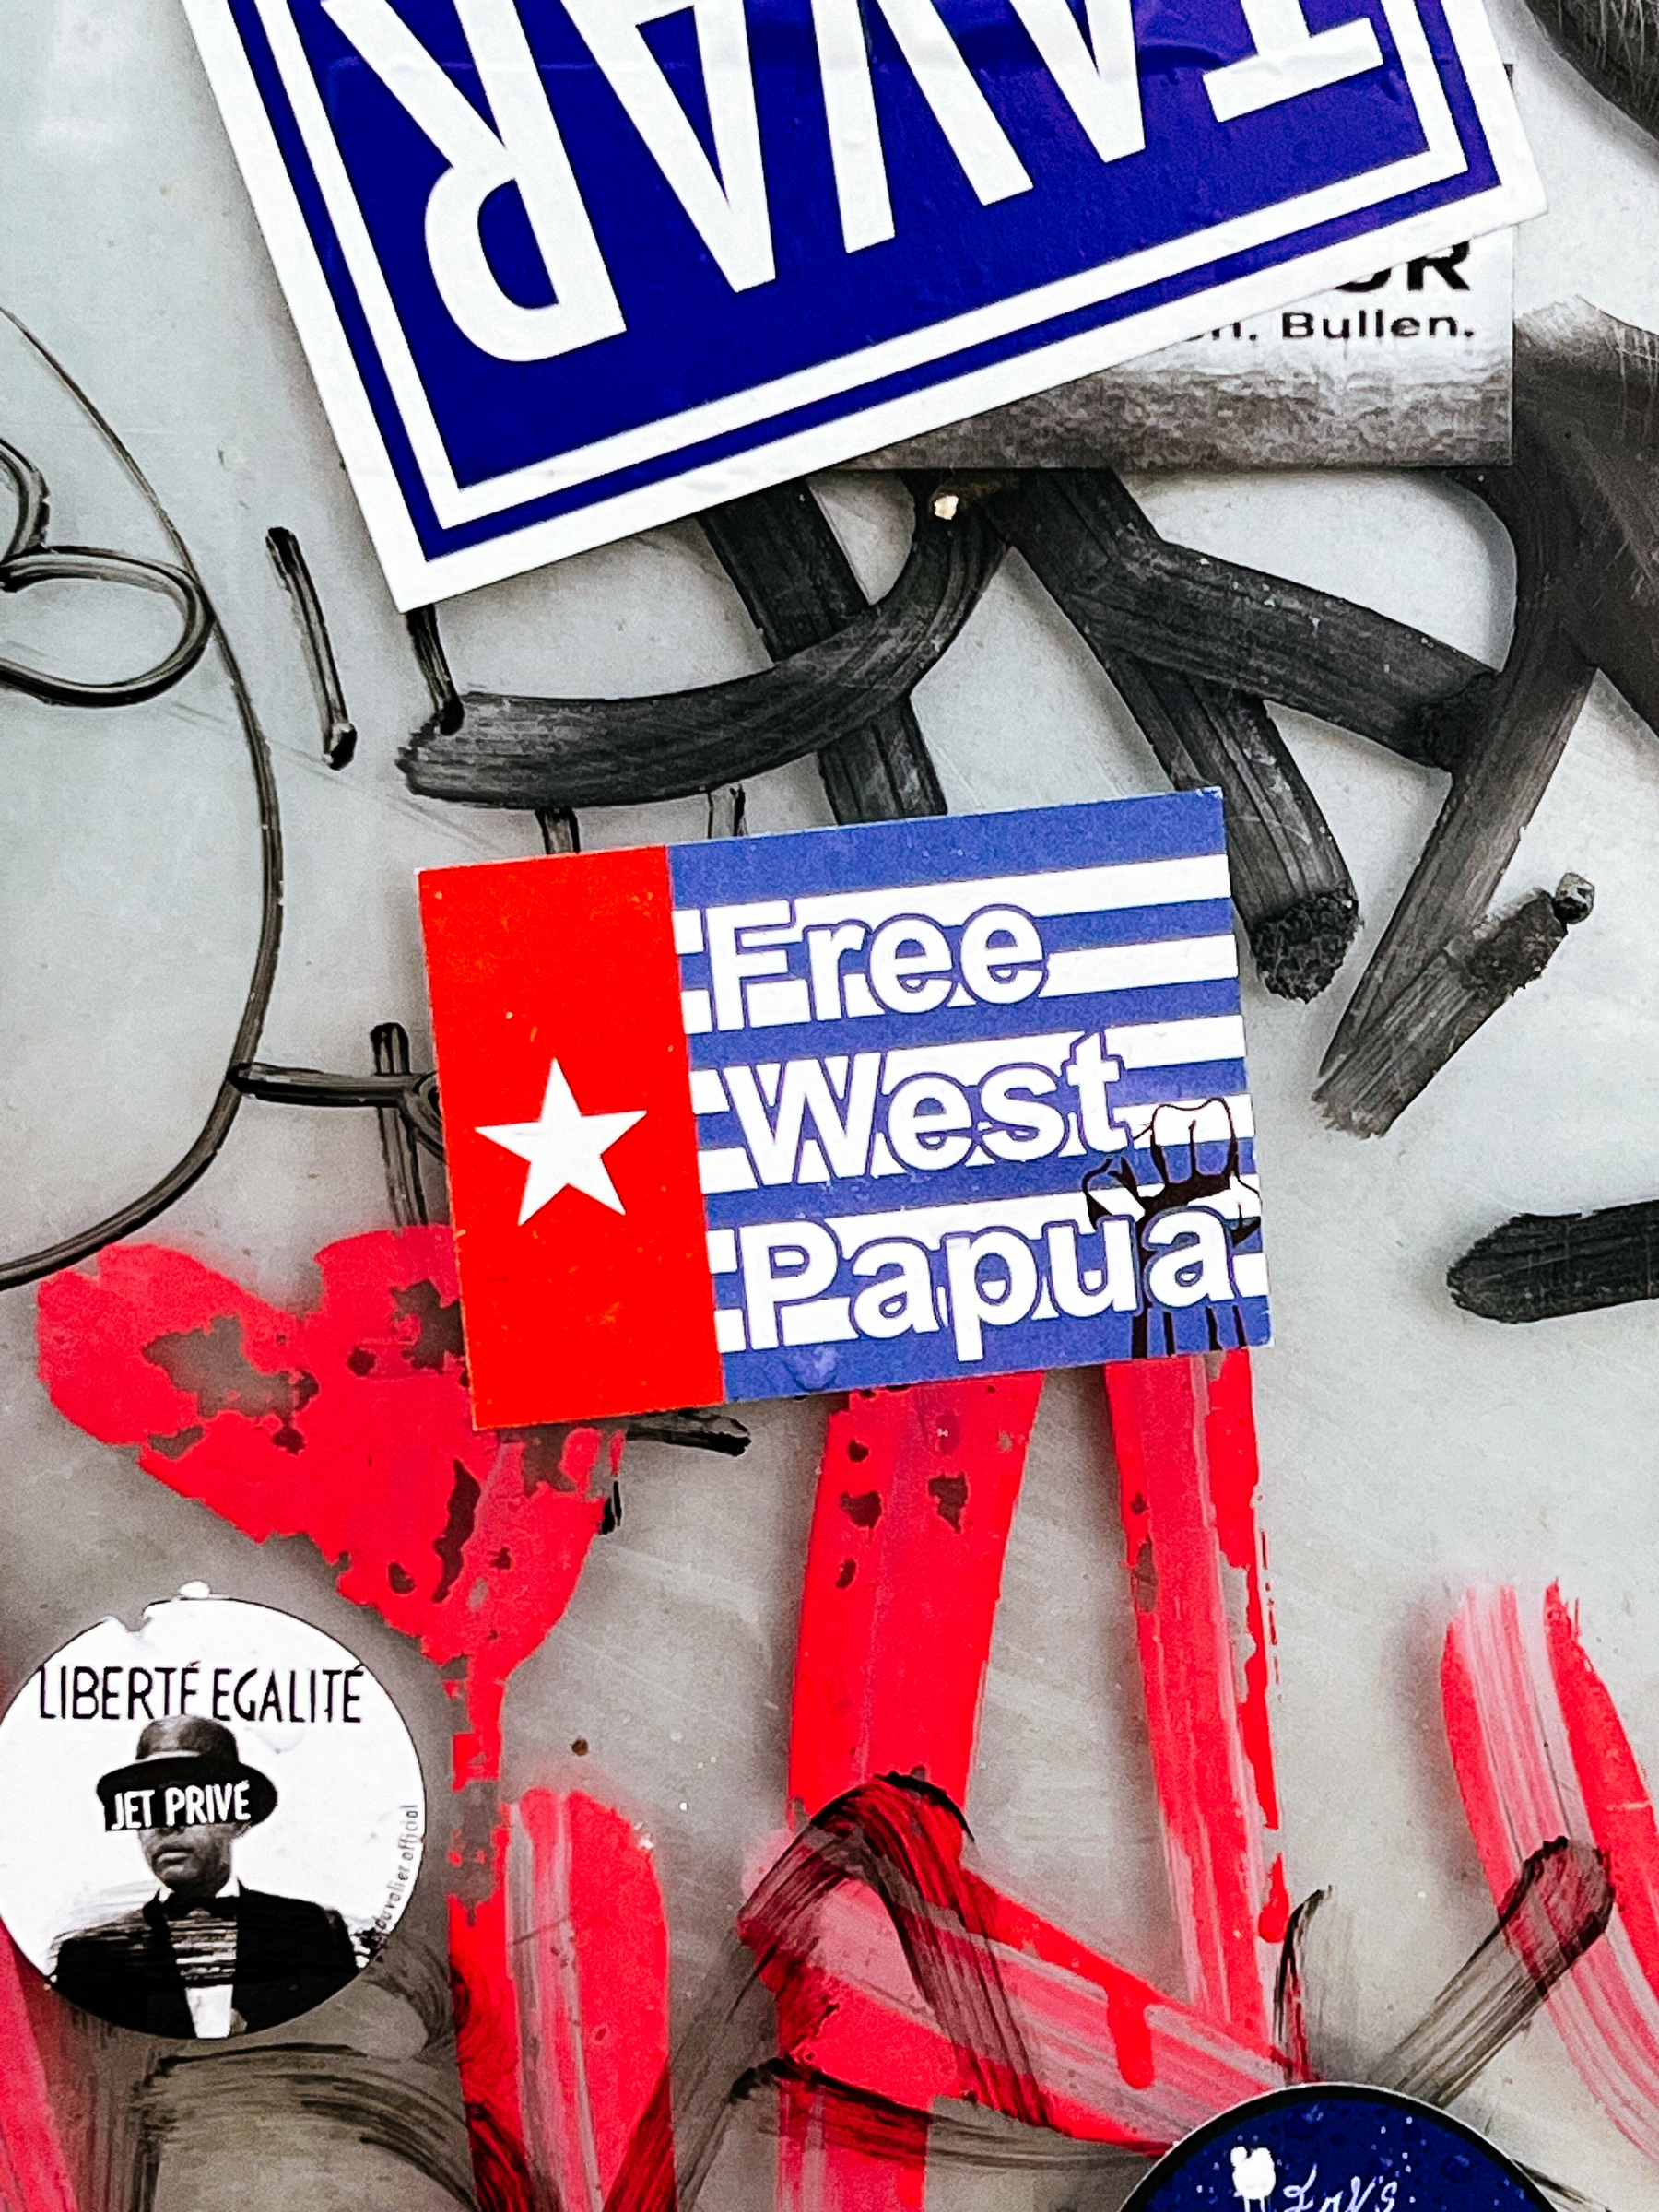 Stickers and graffiti overlay a surface, prominently featuring &ldquo;Free West Papua&rdquo; and &ldquo;LIBERTÉ ÉGALITÉ JET PRIVÉ,&rdquo; amidst abstract red and black paint marks.